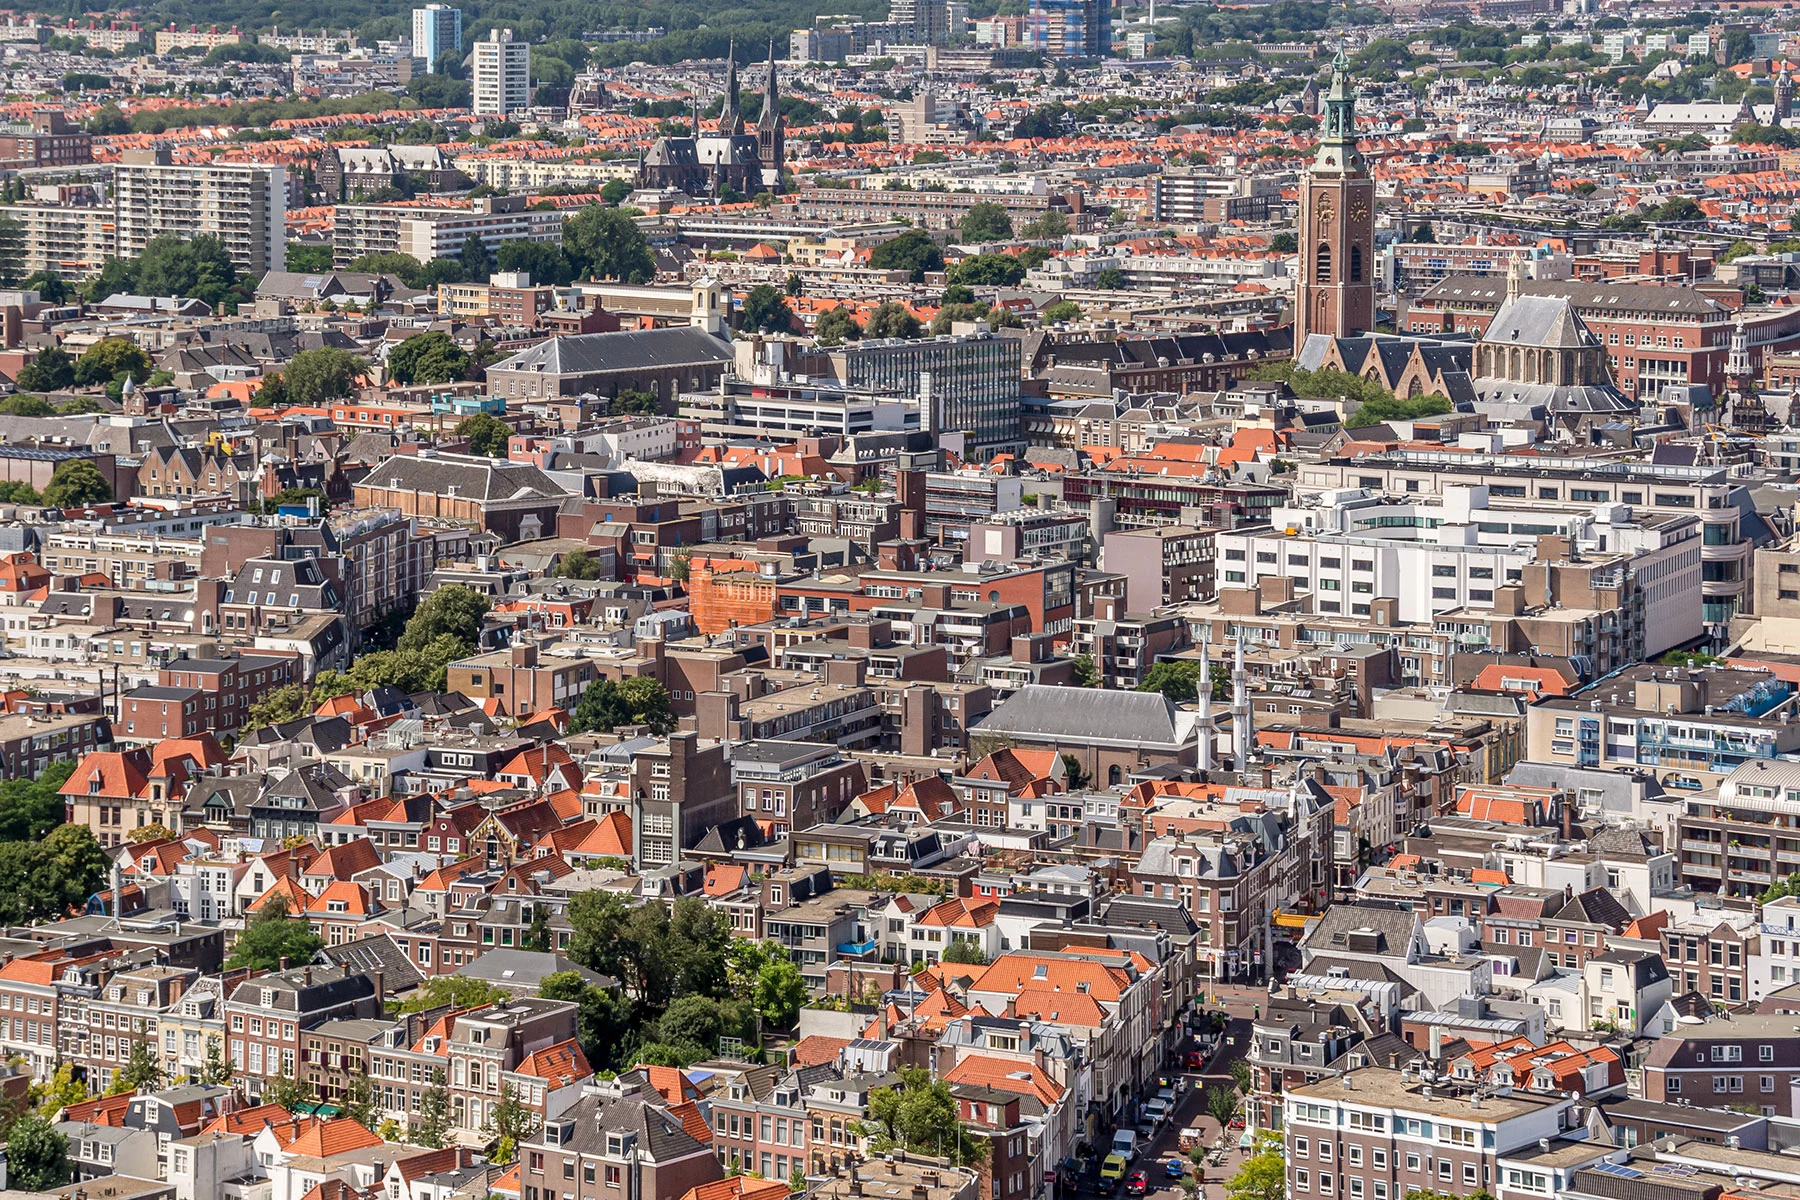 An aerial view of The Hague